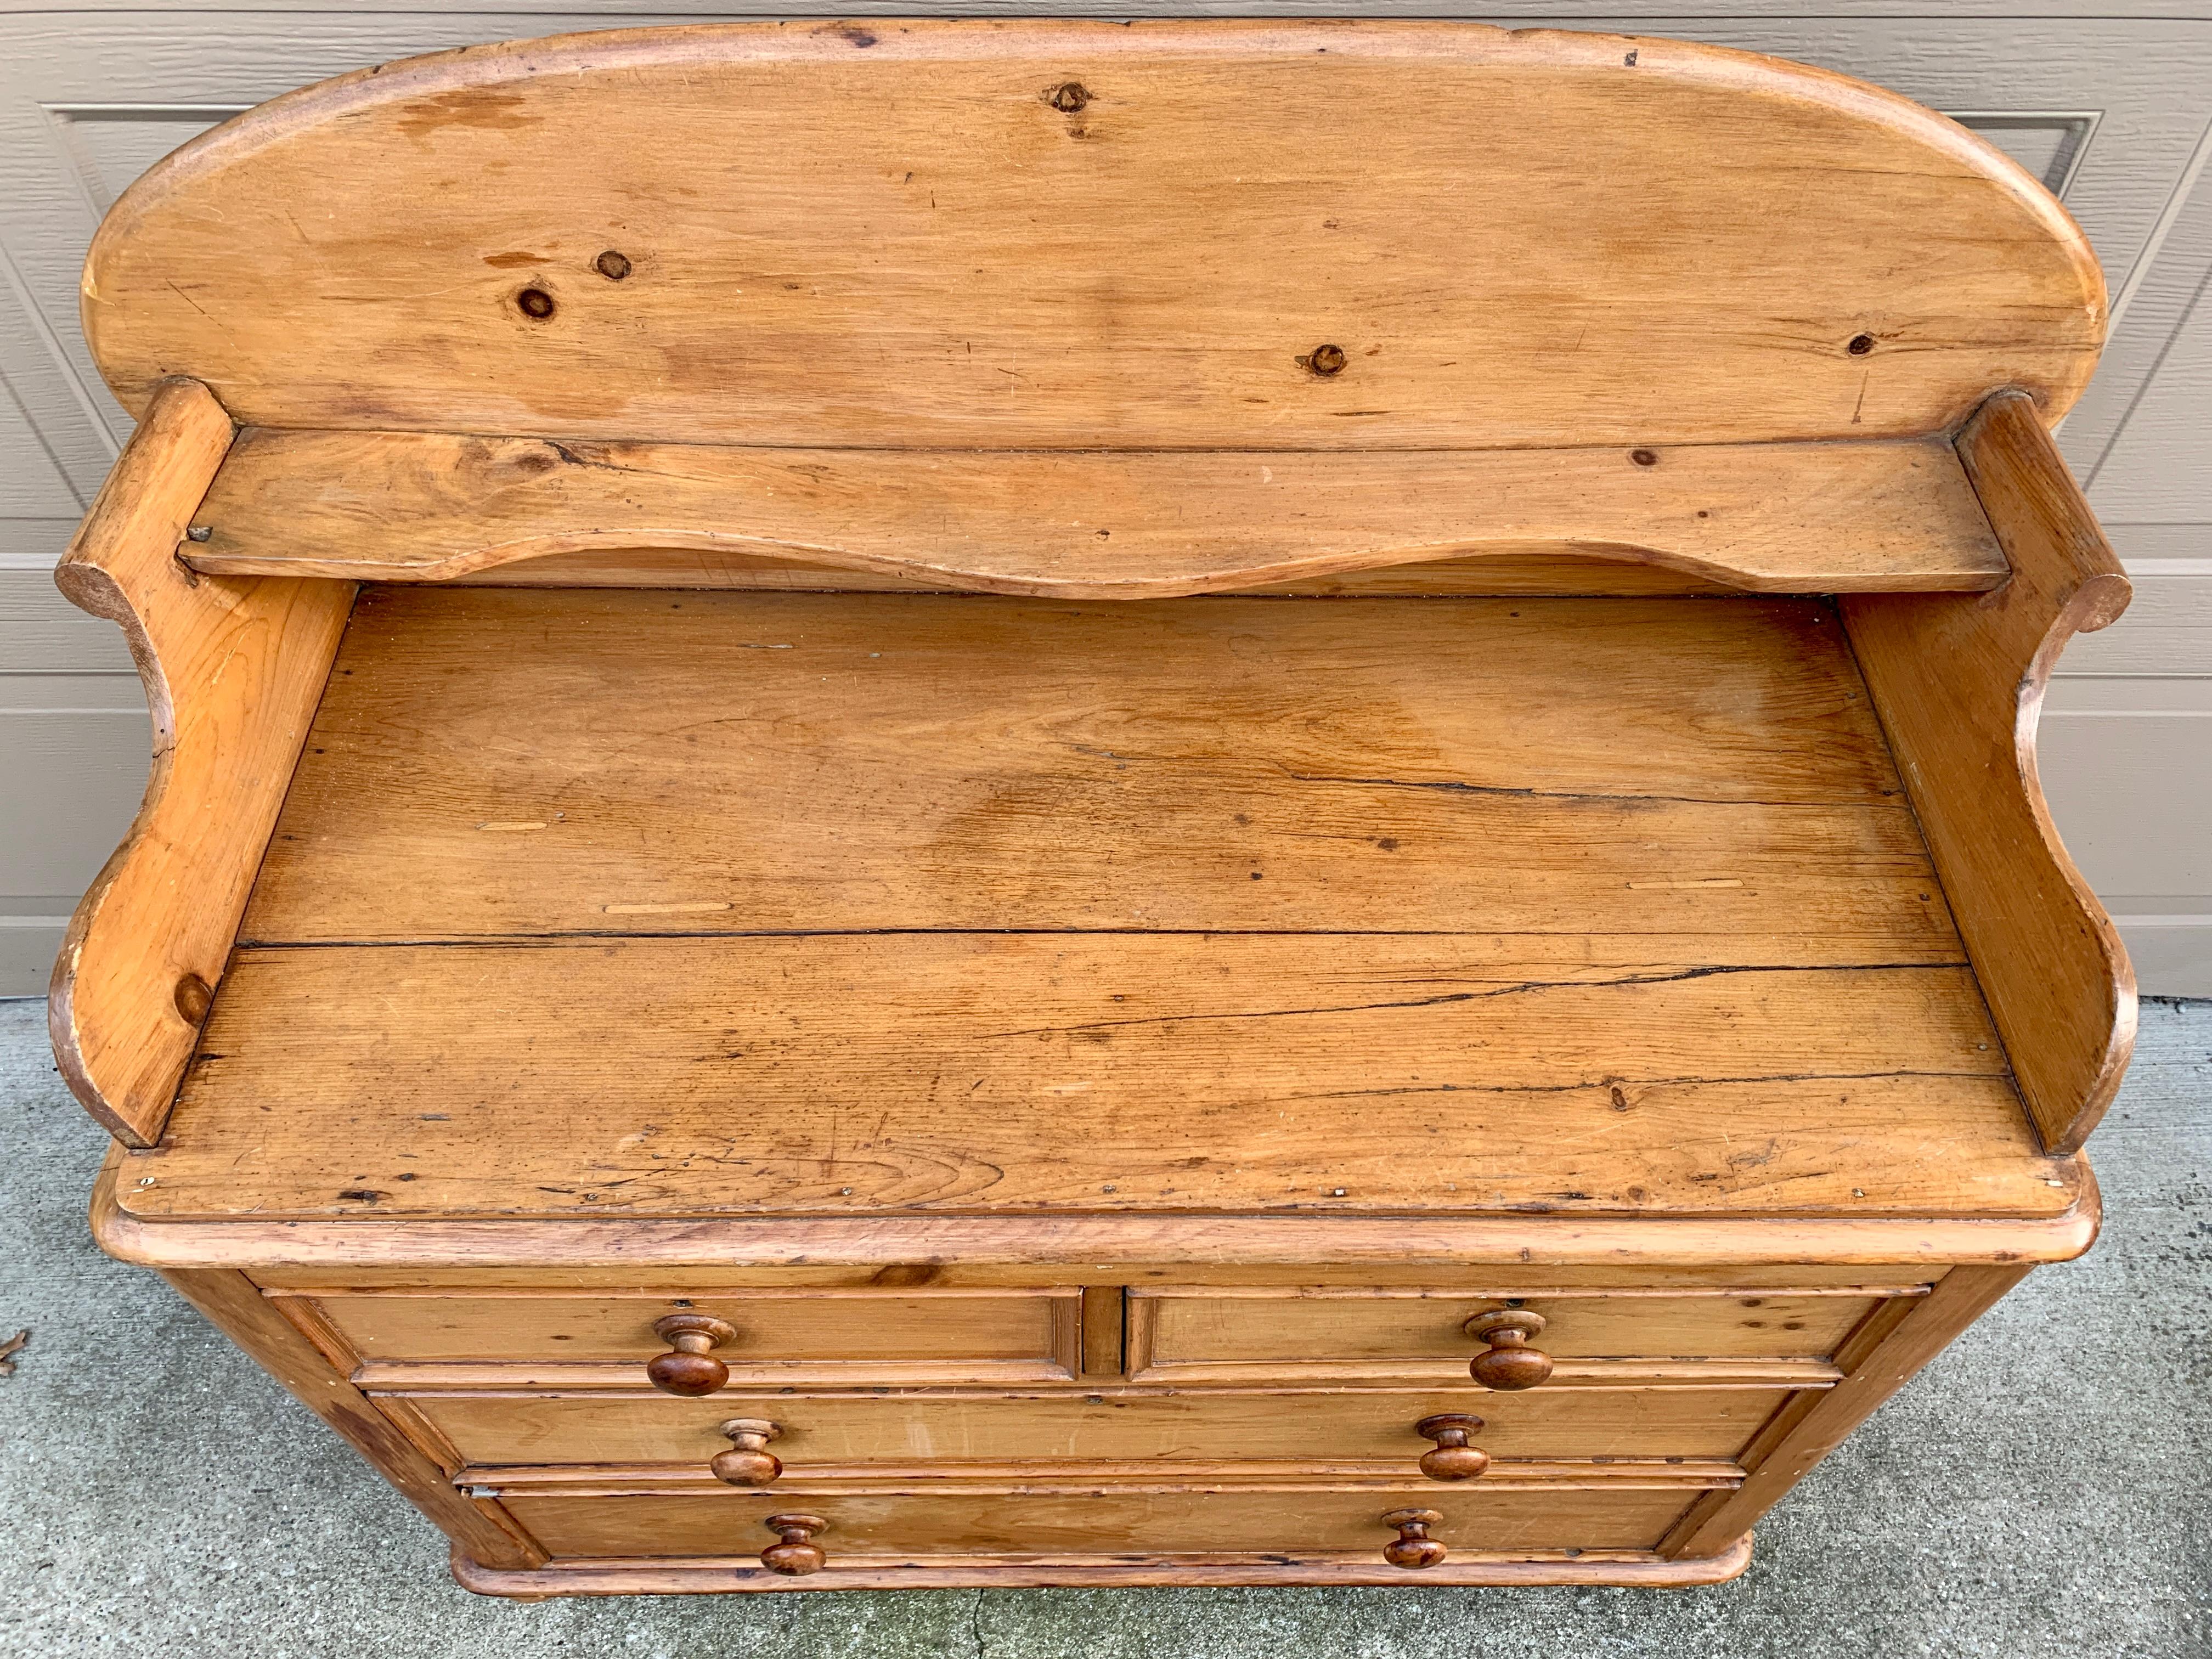 Antique Scandinavian Pine Chest of Drawers or Server, Early 19th Century 4